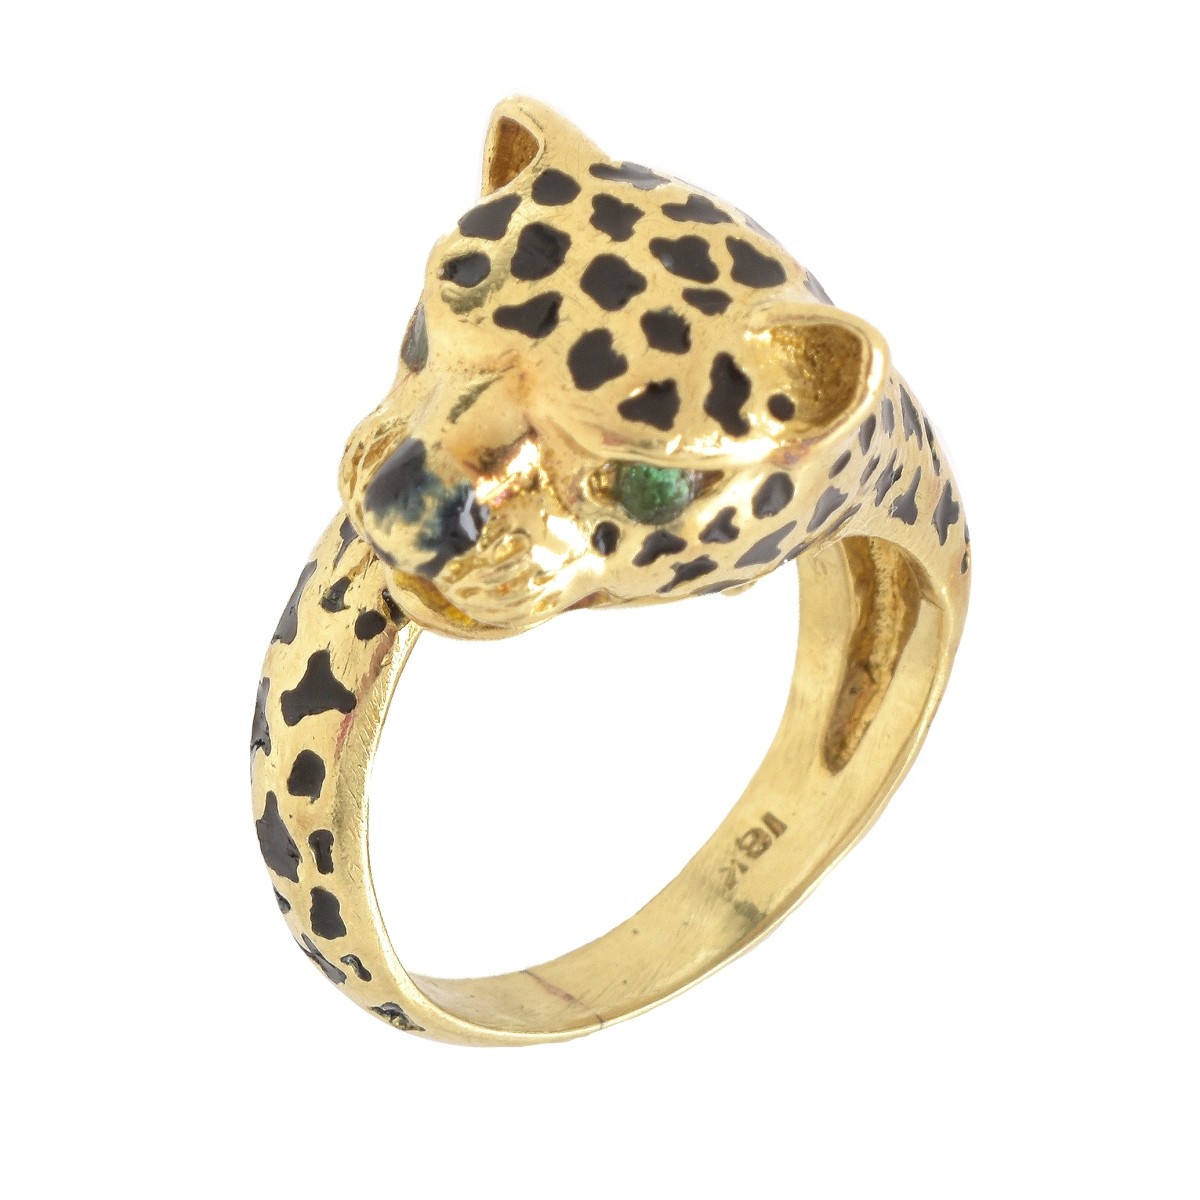 Cartier style 18K Ring | Kodner Auctions